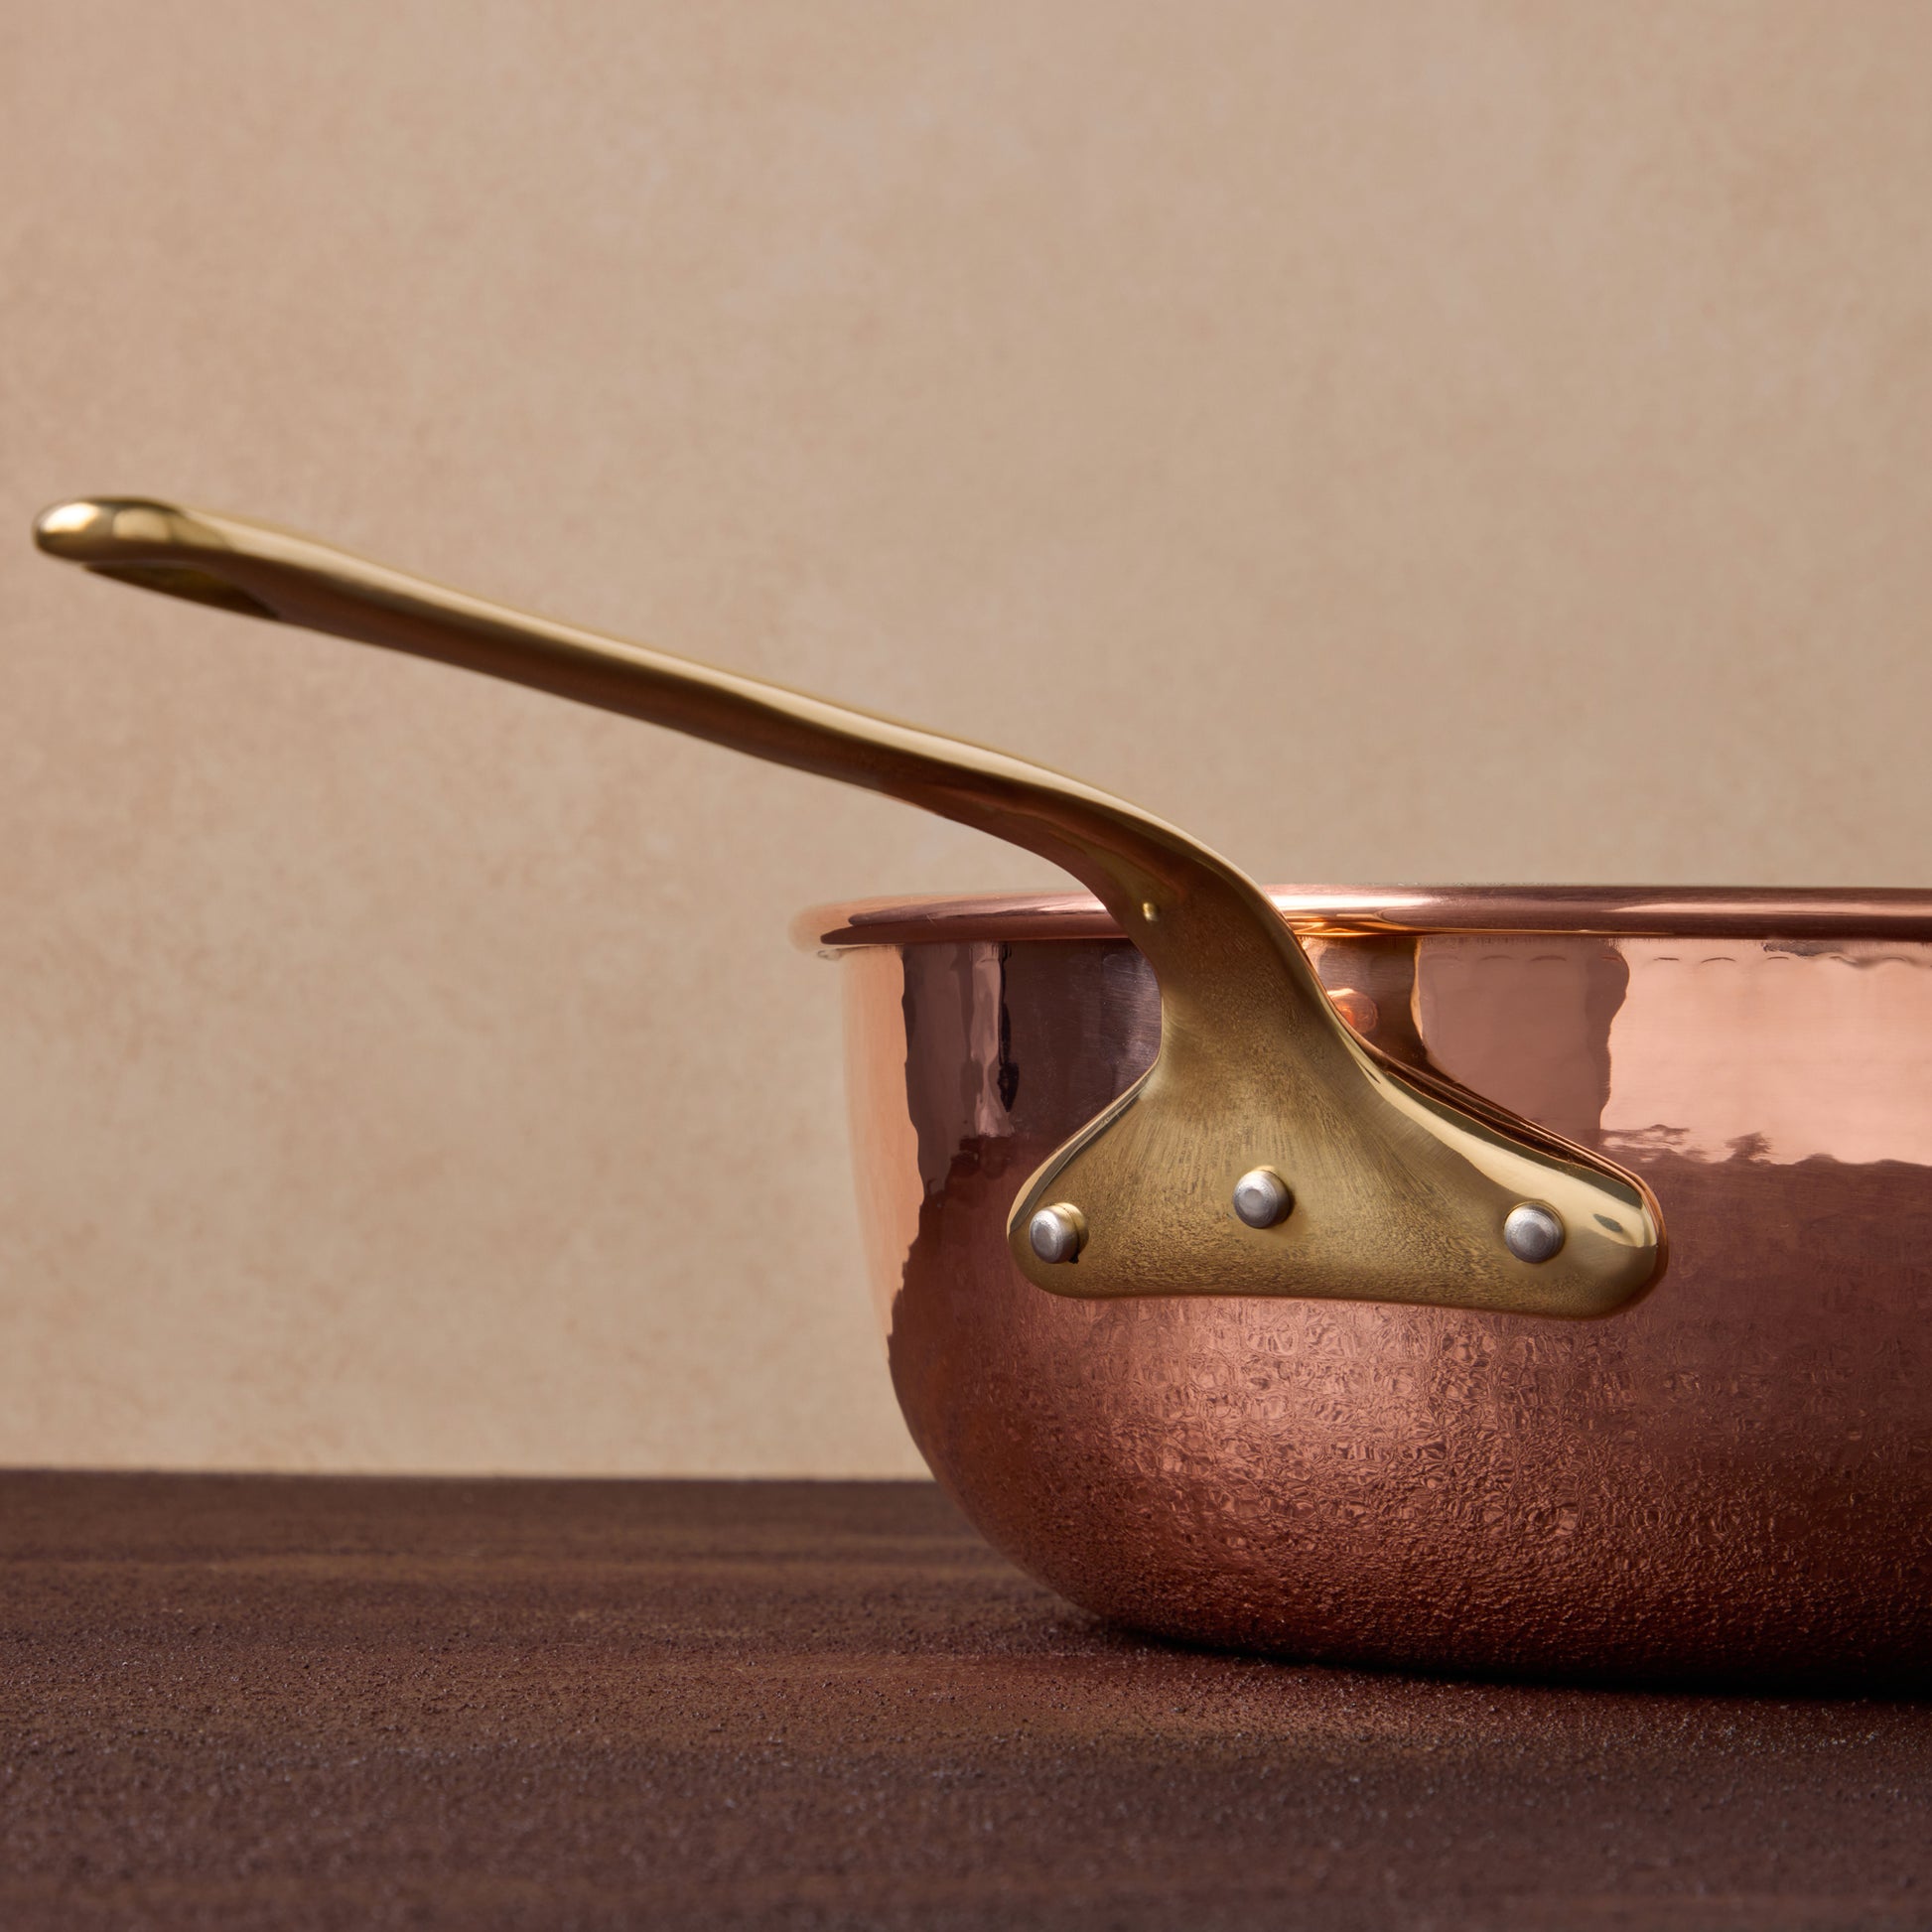 Ruffoni copper chef pan is, among other things, the undisputed queen of risotto. Handcrafted Italian cookware for exceptional cooking results